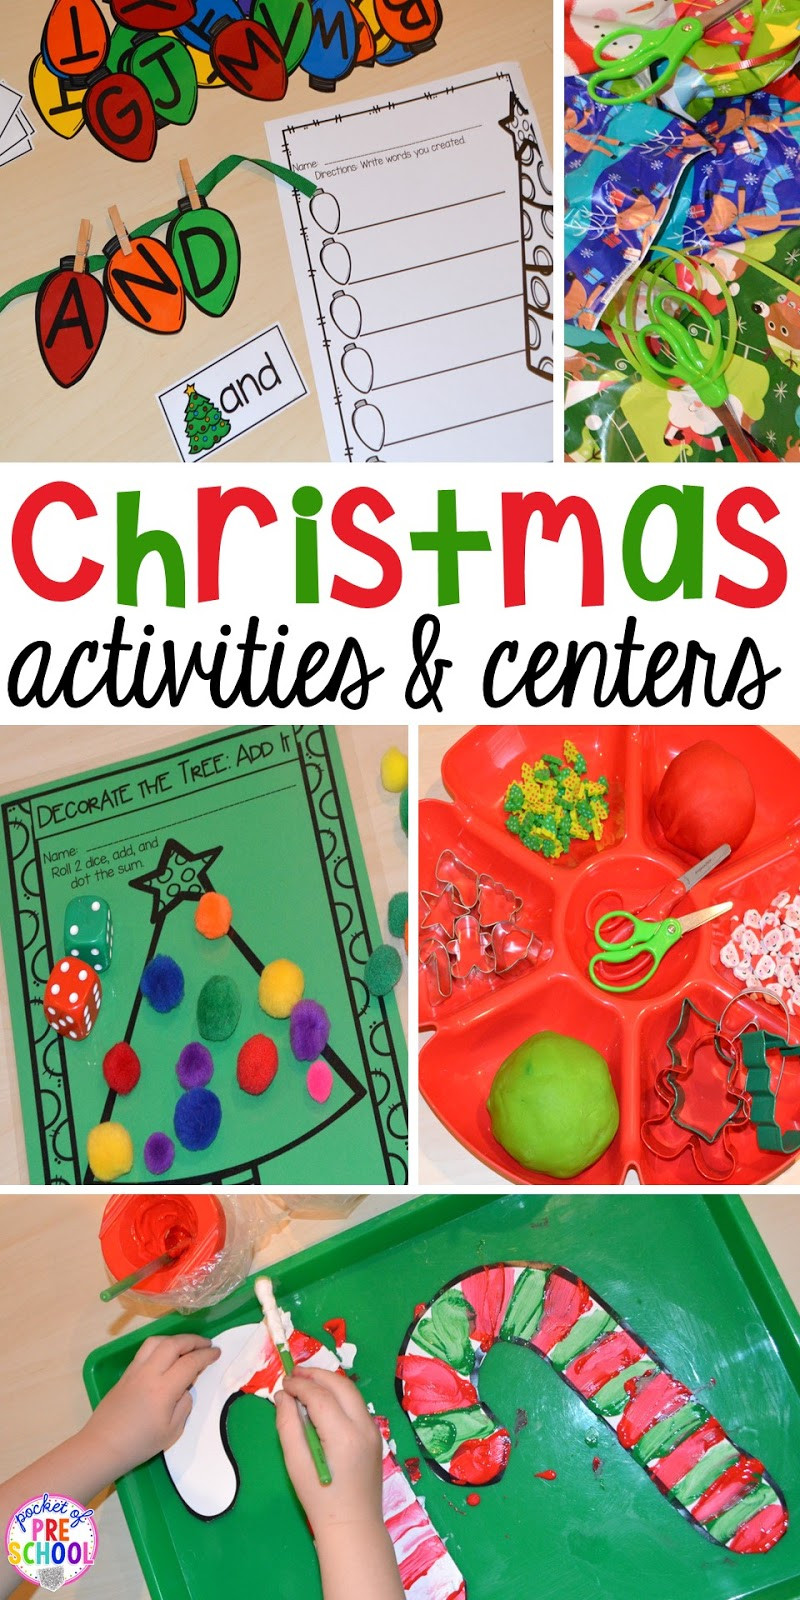 Pre K Christmas Party Ideas
 Christmas Activities and Centers for Preschool and